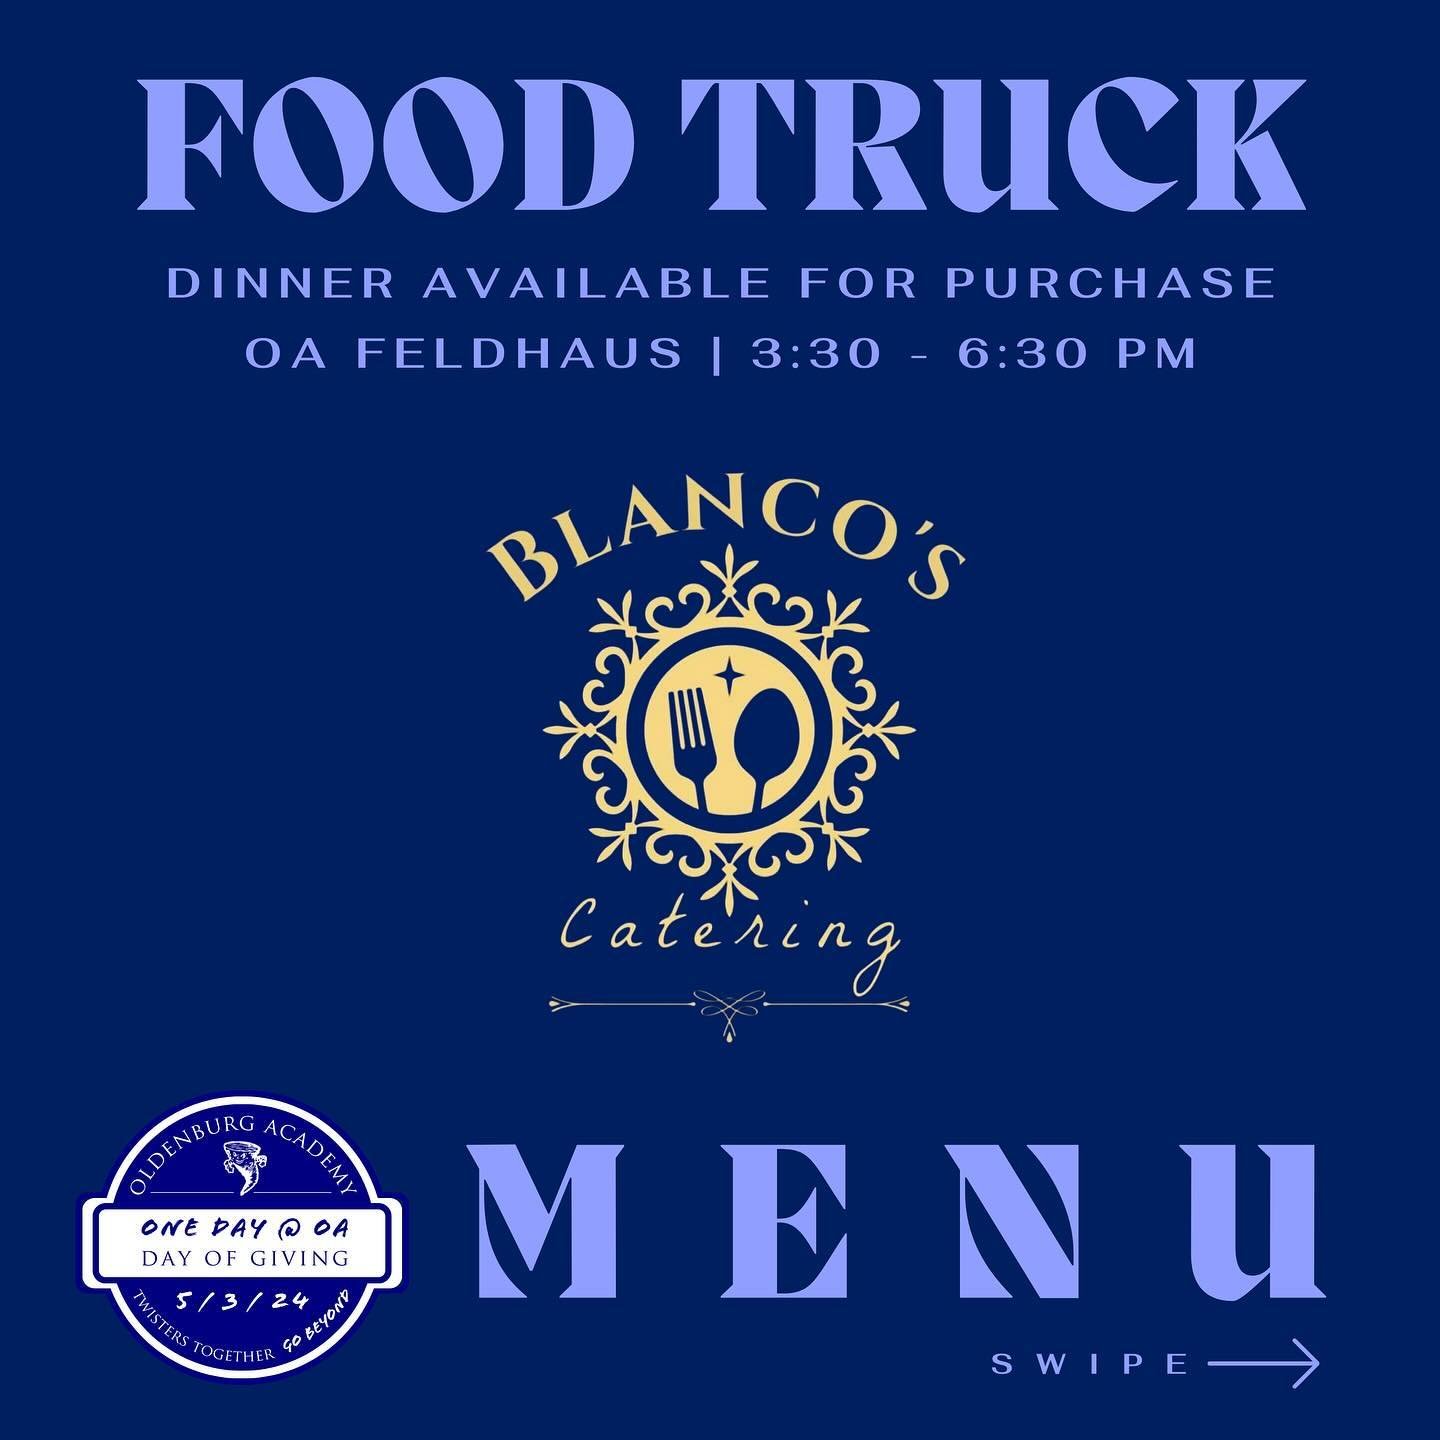 Stop by on Friday for dinner from Blanco&rsquo;s Catering food truck (3:30-6:30 pm)!

~CASH PAYMENTS ACCEPTED~

Also make sure to support our talented fine and performing arts students by attending the Student Art Show (3:30pm in the OA Feldhaus) and